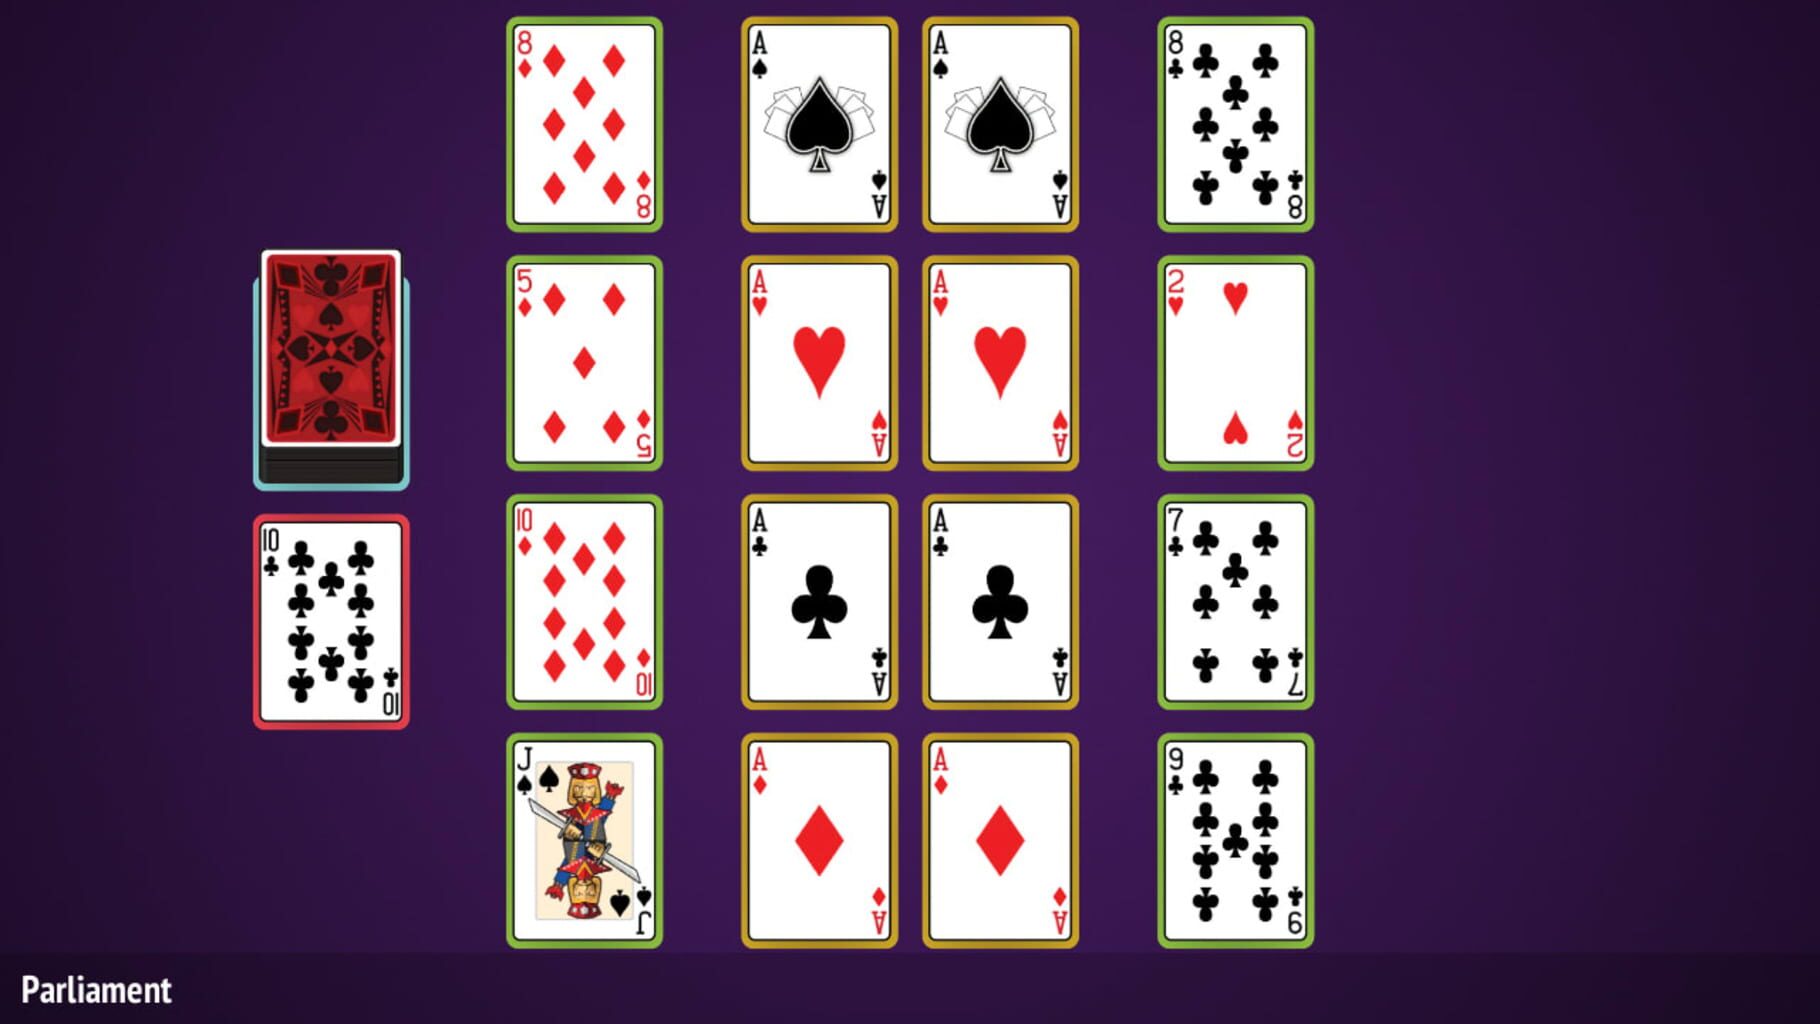 Forty Thieves Solitaire Collection screenshot